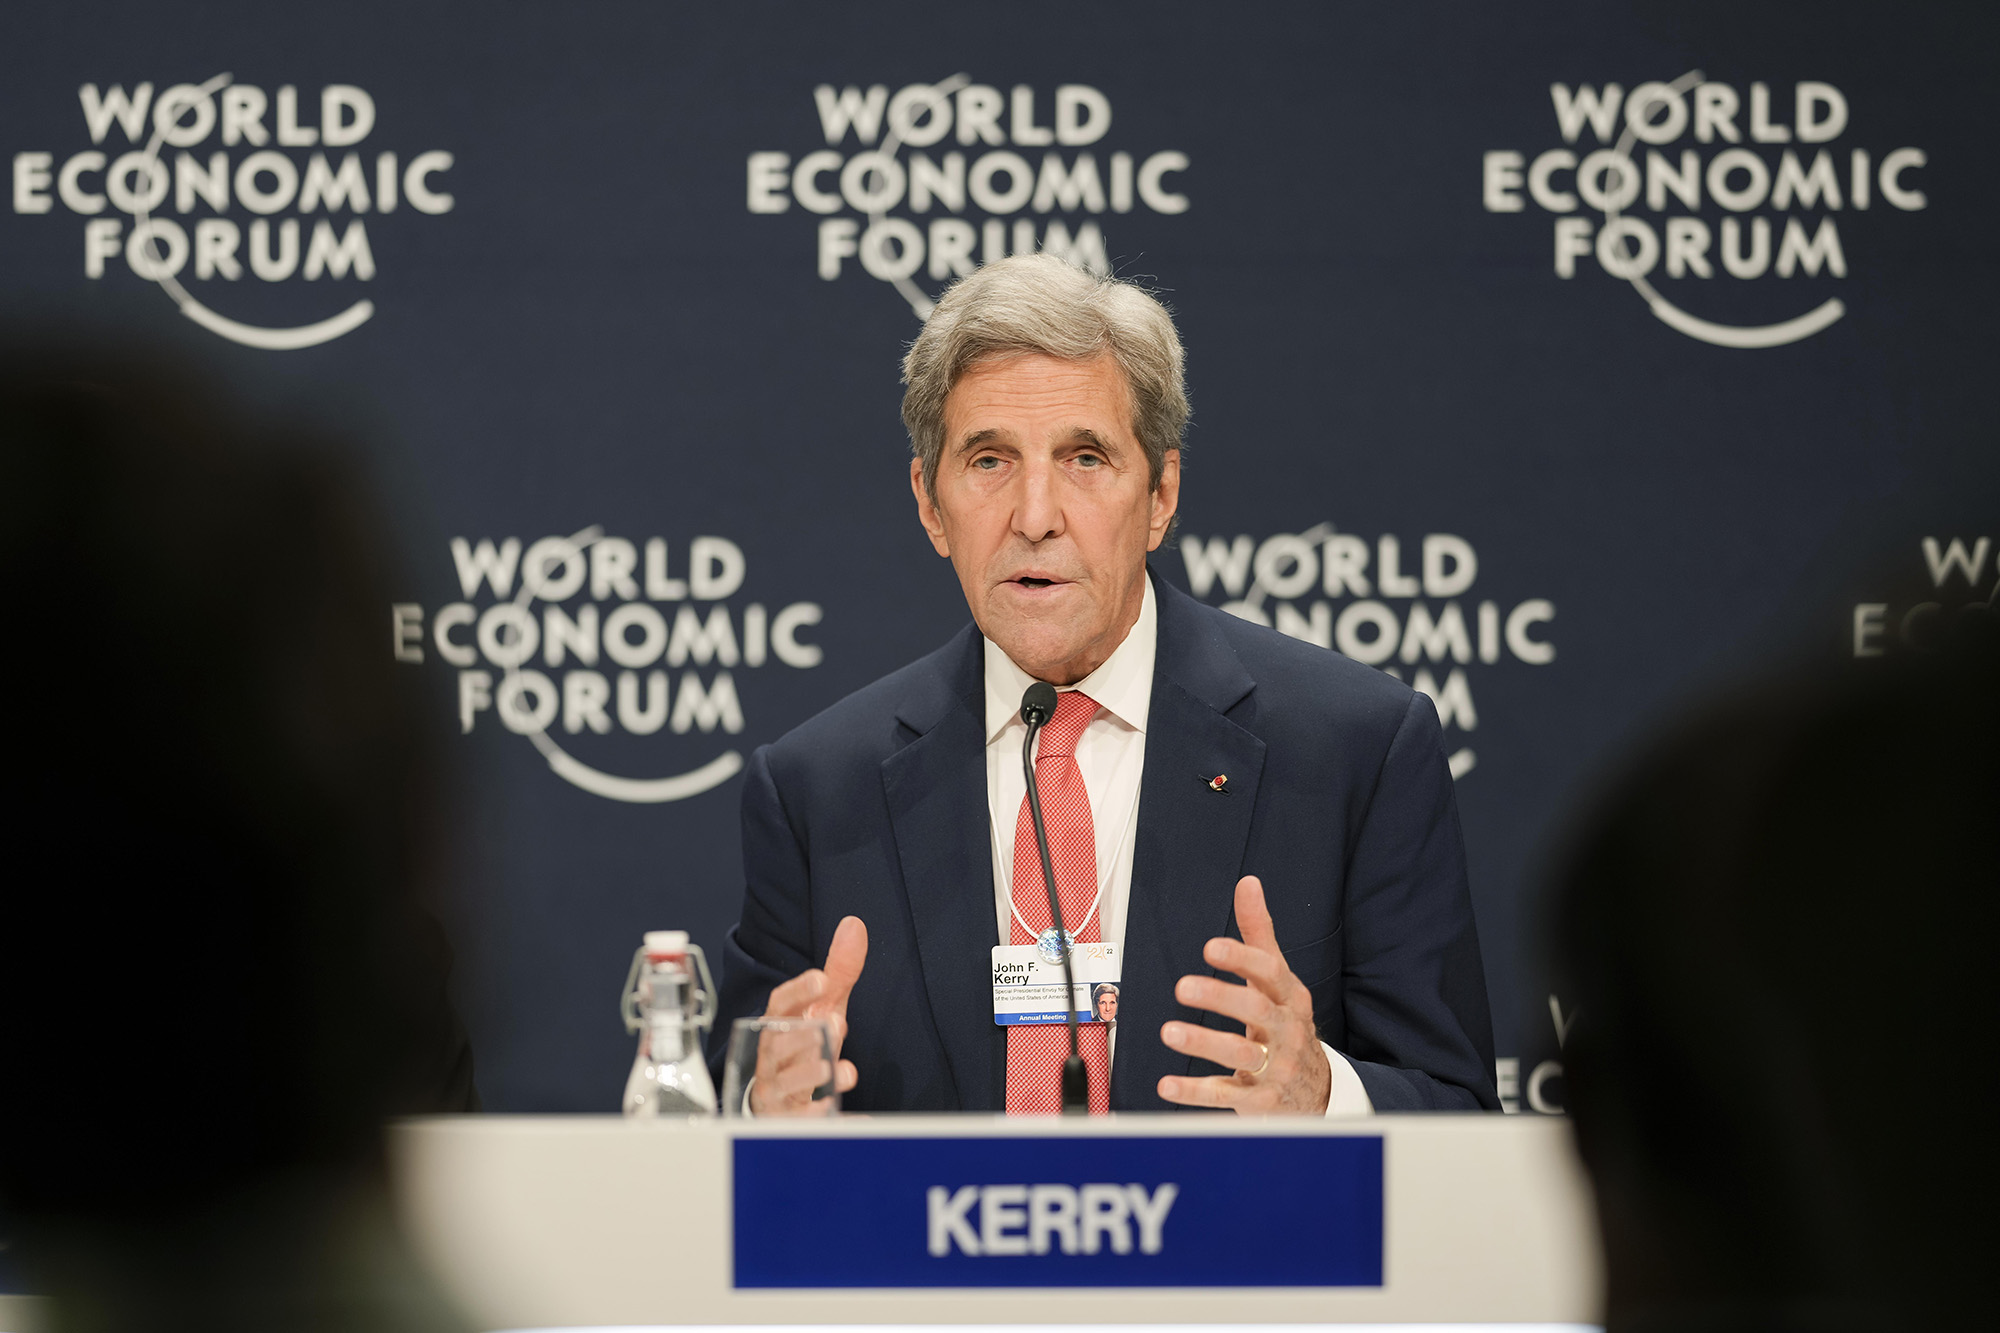 John F. Kerry, Special Presidential Envoy for Climate of the United States, speaks during a news conference at the World Economic Forum in Davos, Switzerland, on May 24.